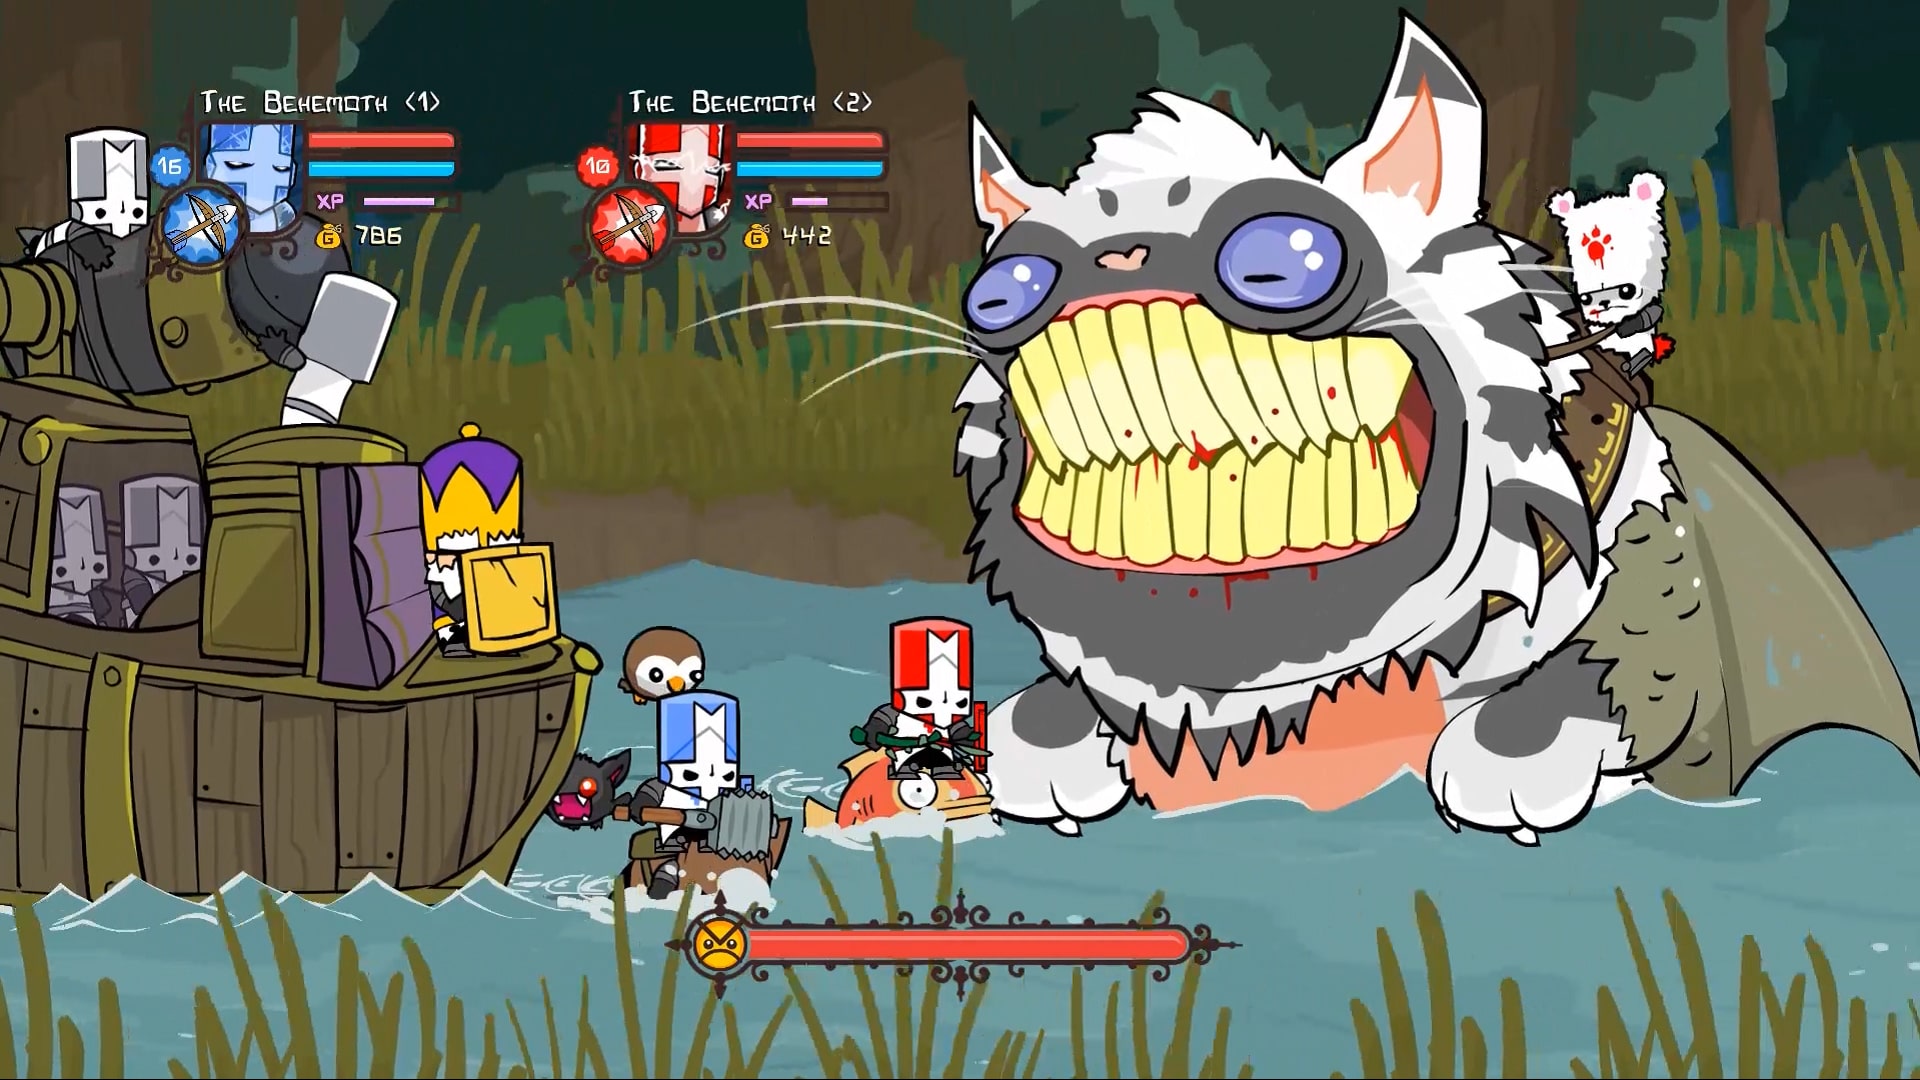 PSA: Castle Crashers Remastered for PS4 launches next week, too